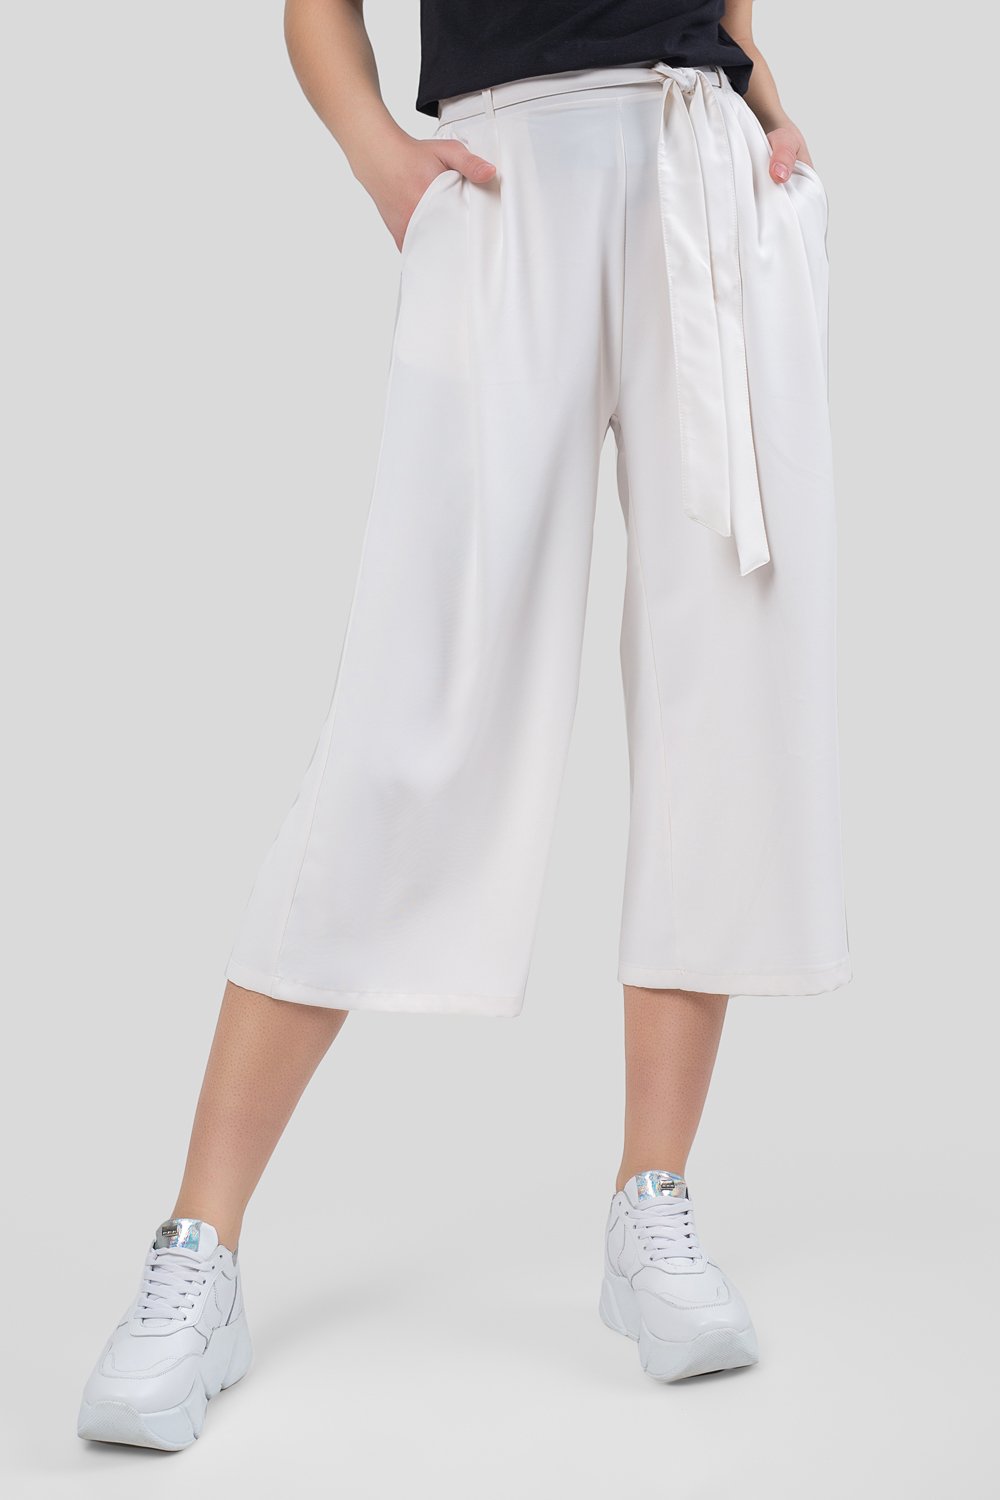 Culottes with belt and pockets